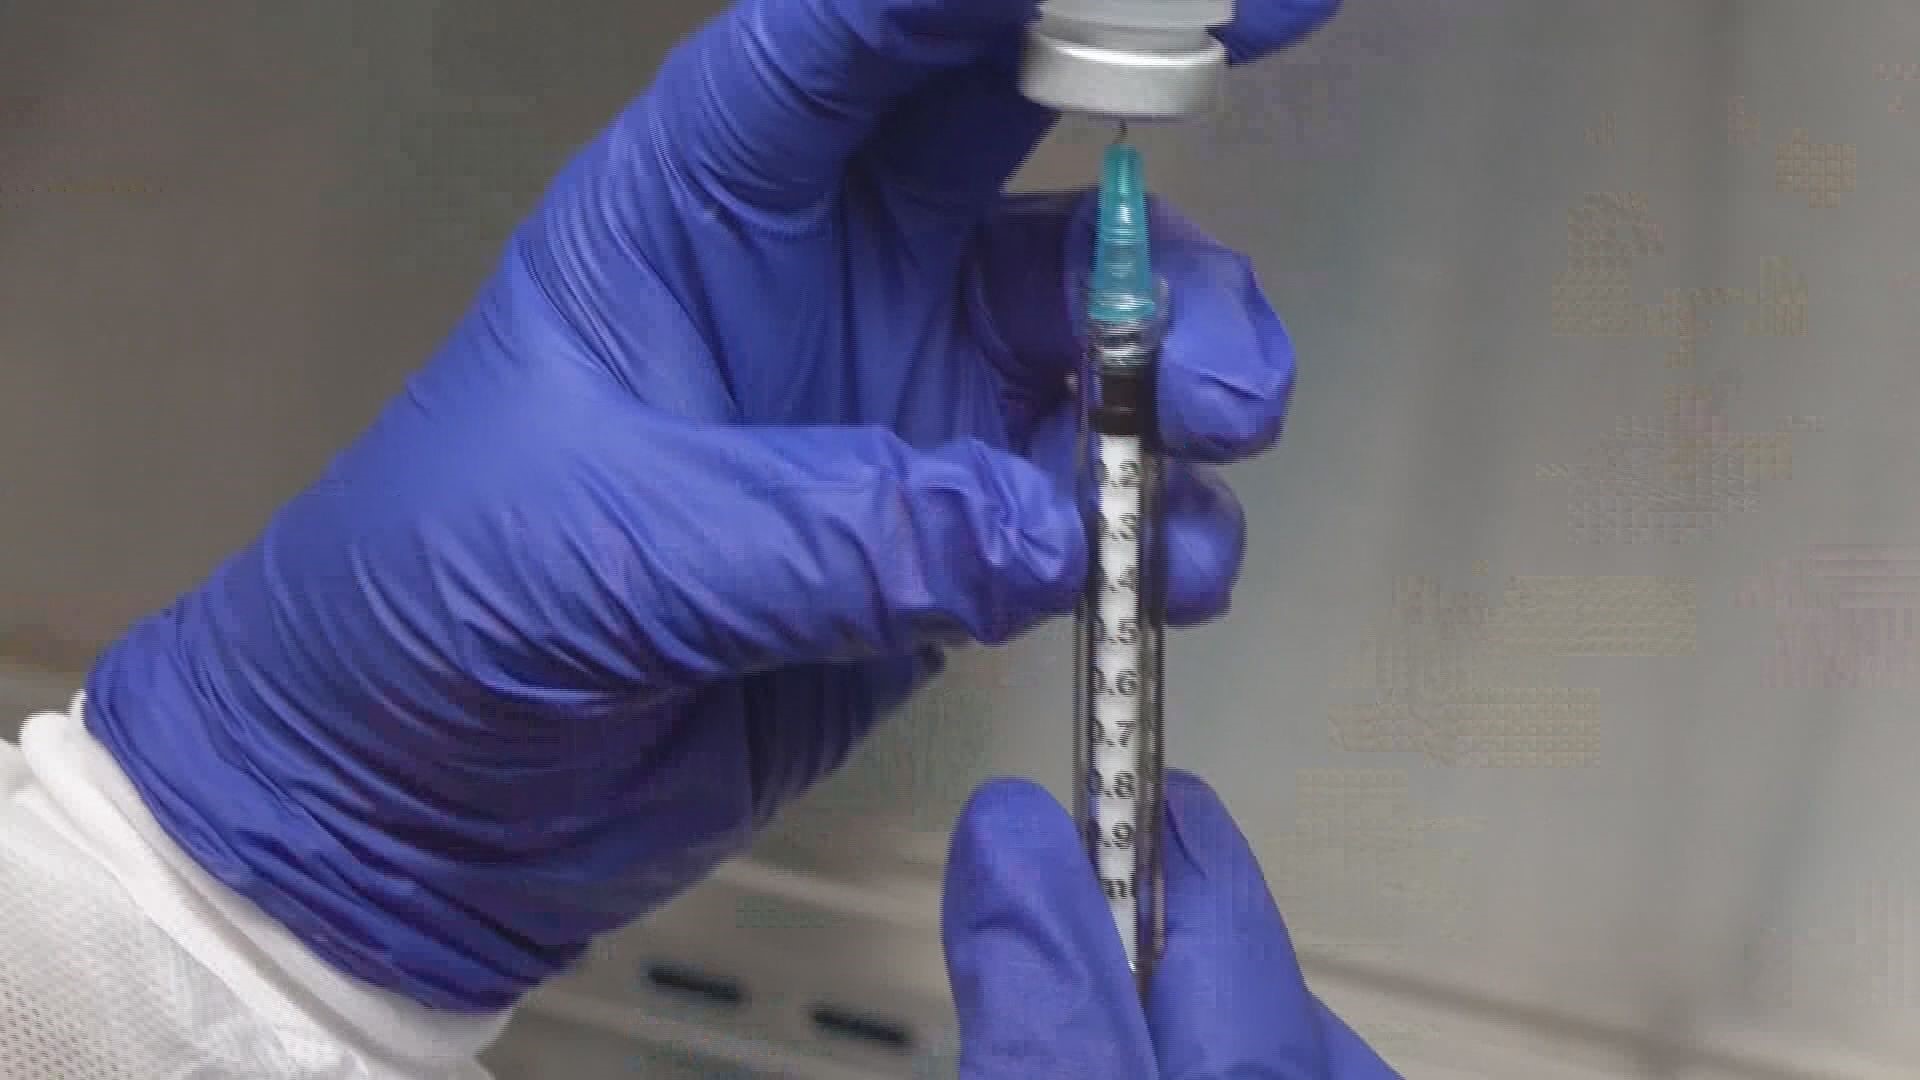 At two Knoxville-area hospitals, only 60-70% of staff got the COVID-19 vaccine. Doctors said that could delay herd immunity.